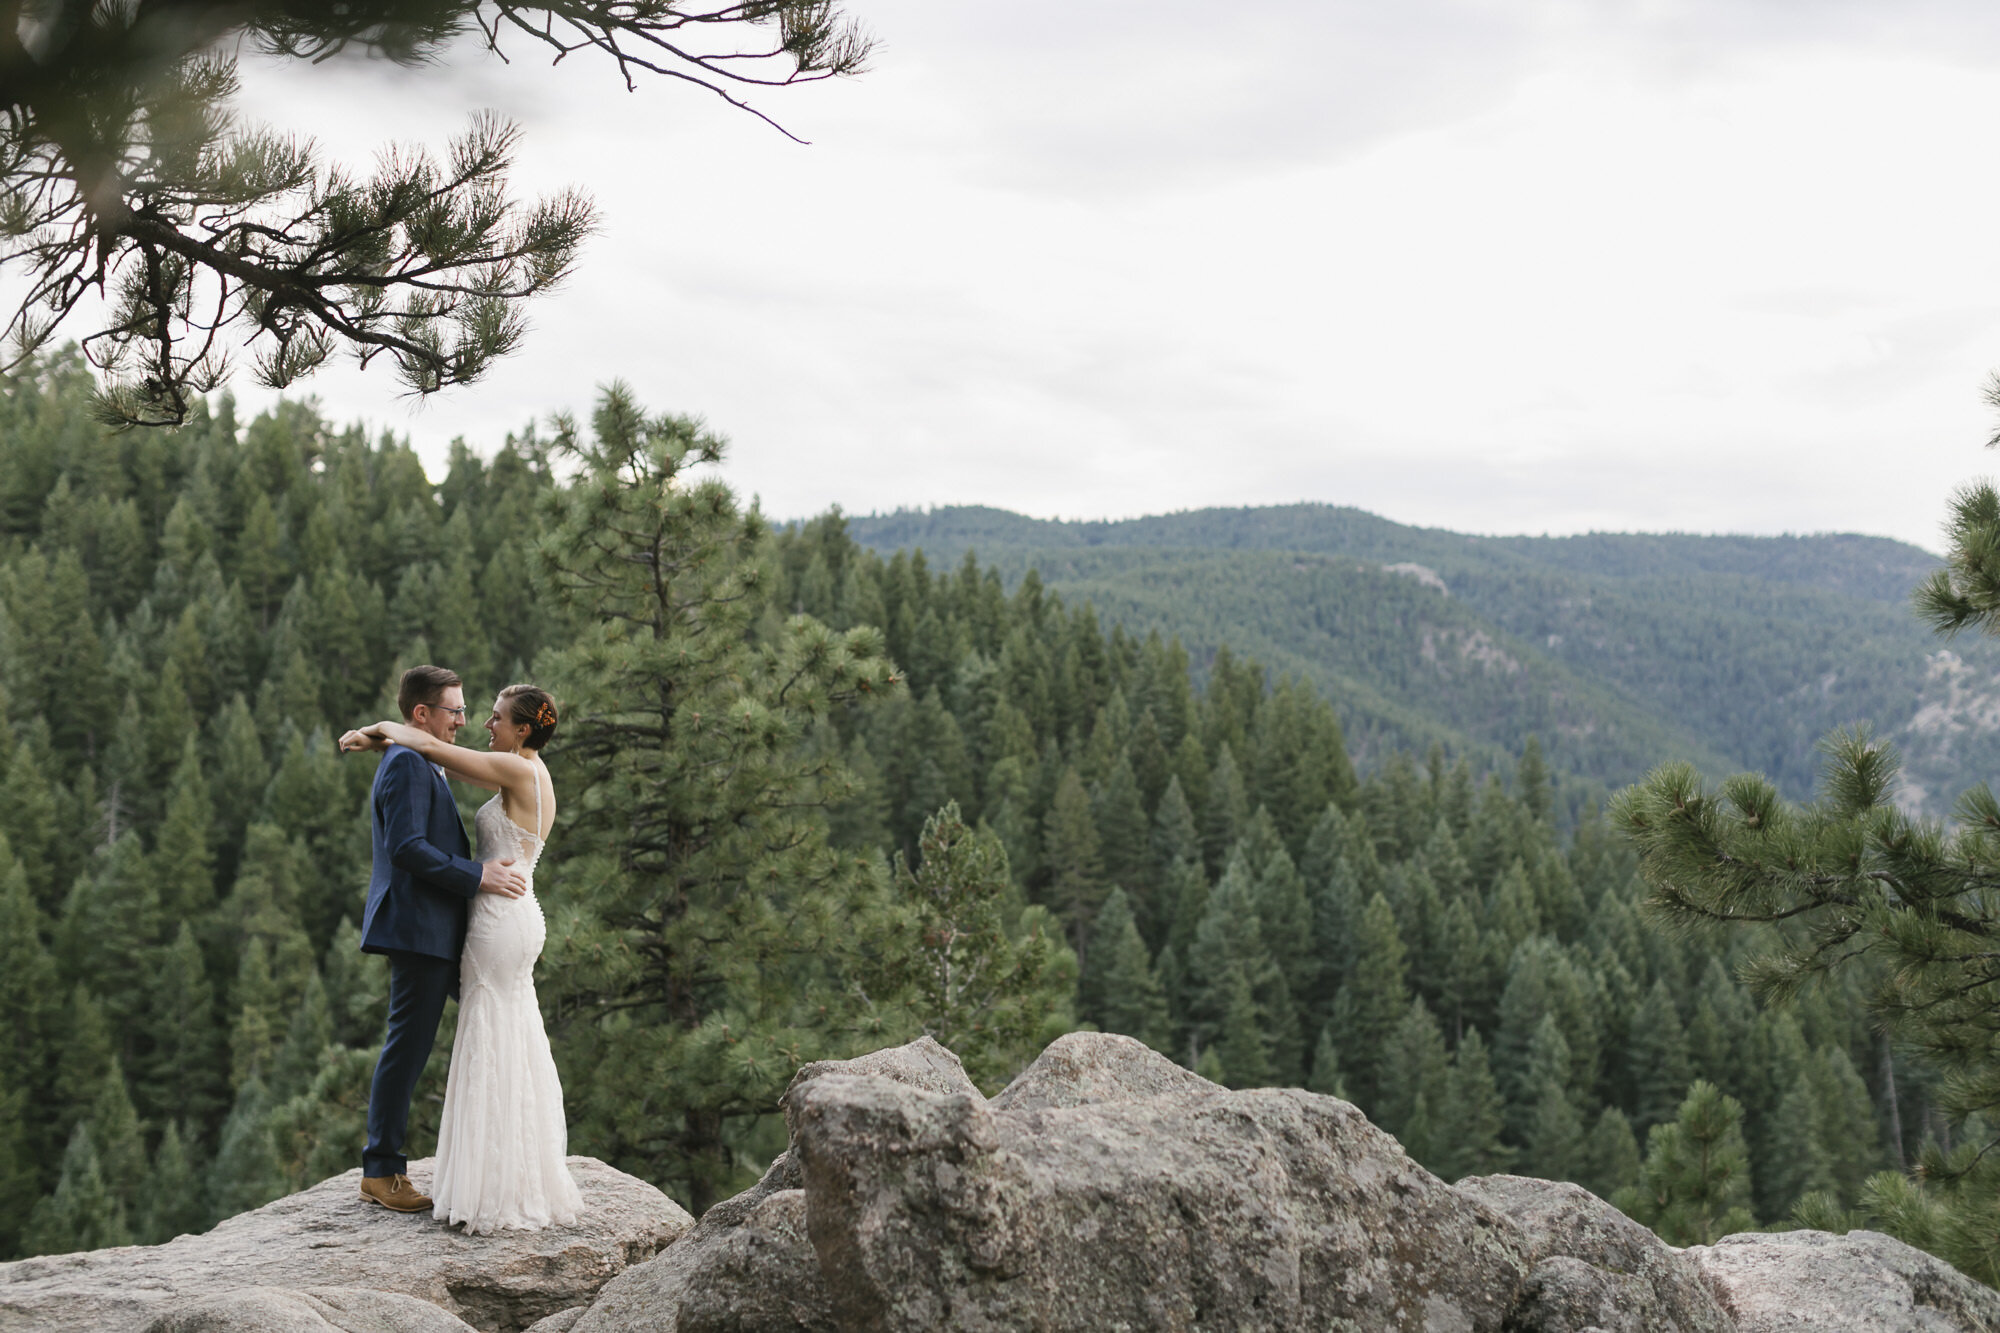 Bride and groom stand on rocky overlook with a pine forest in the background